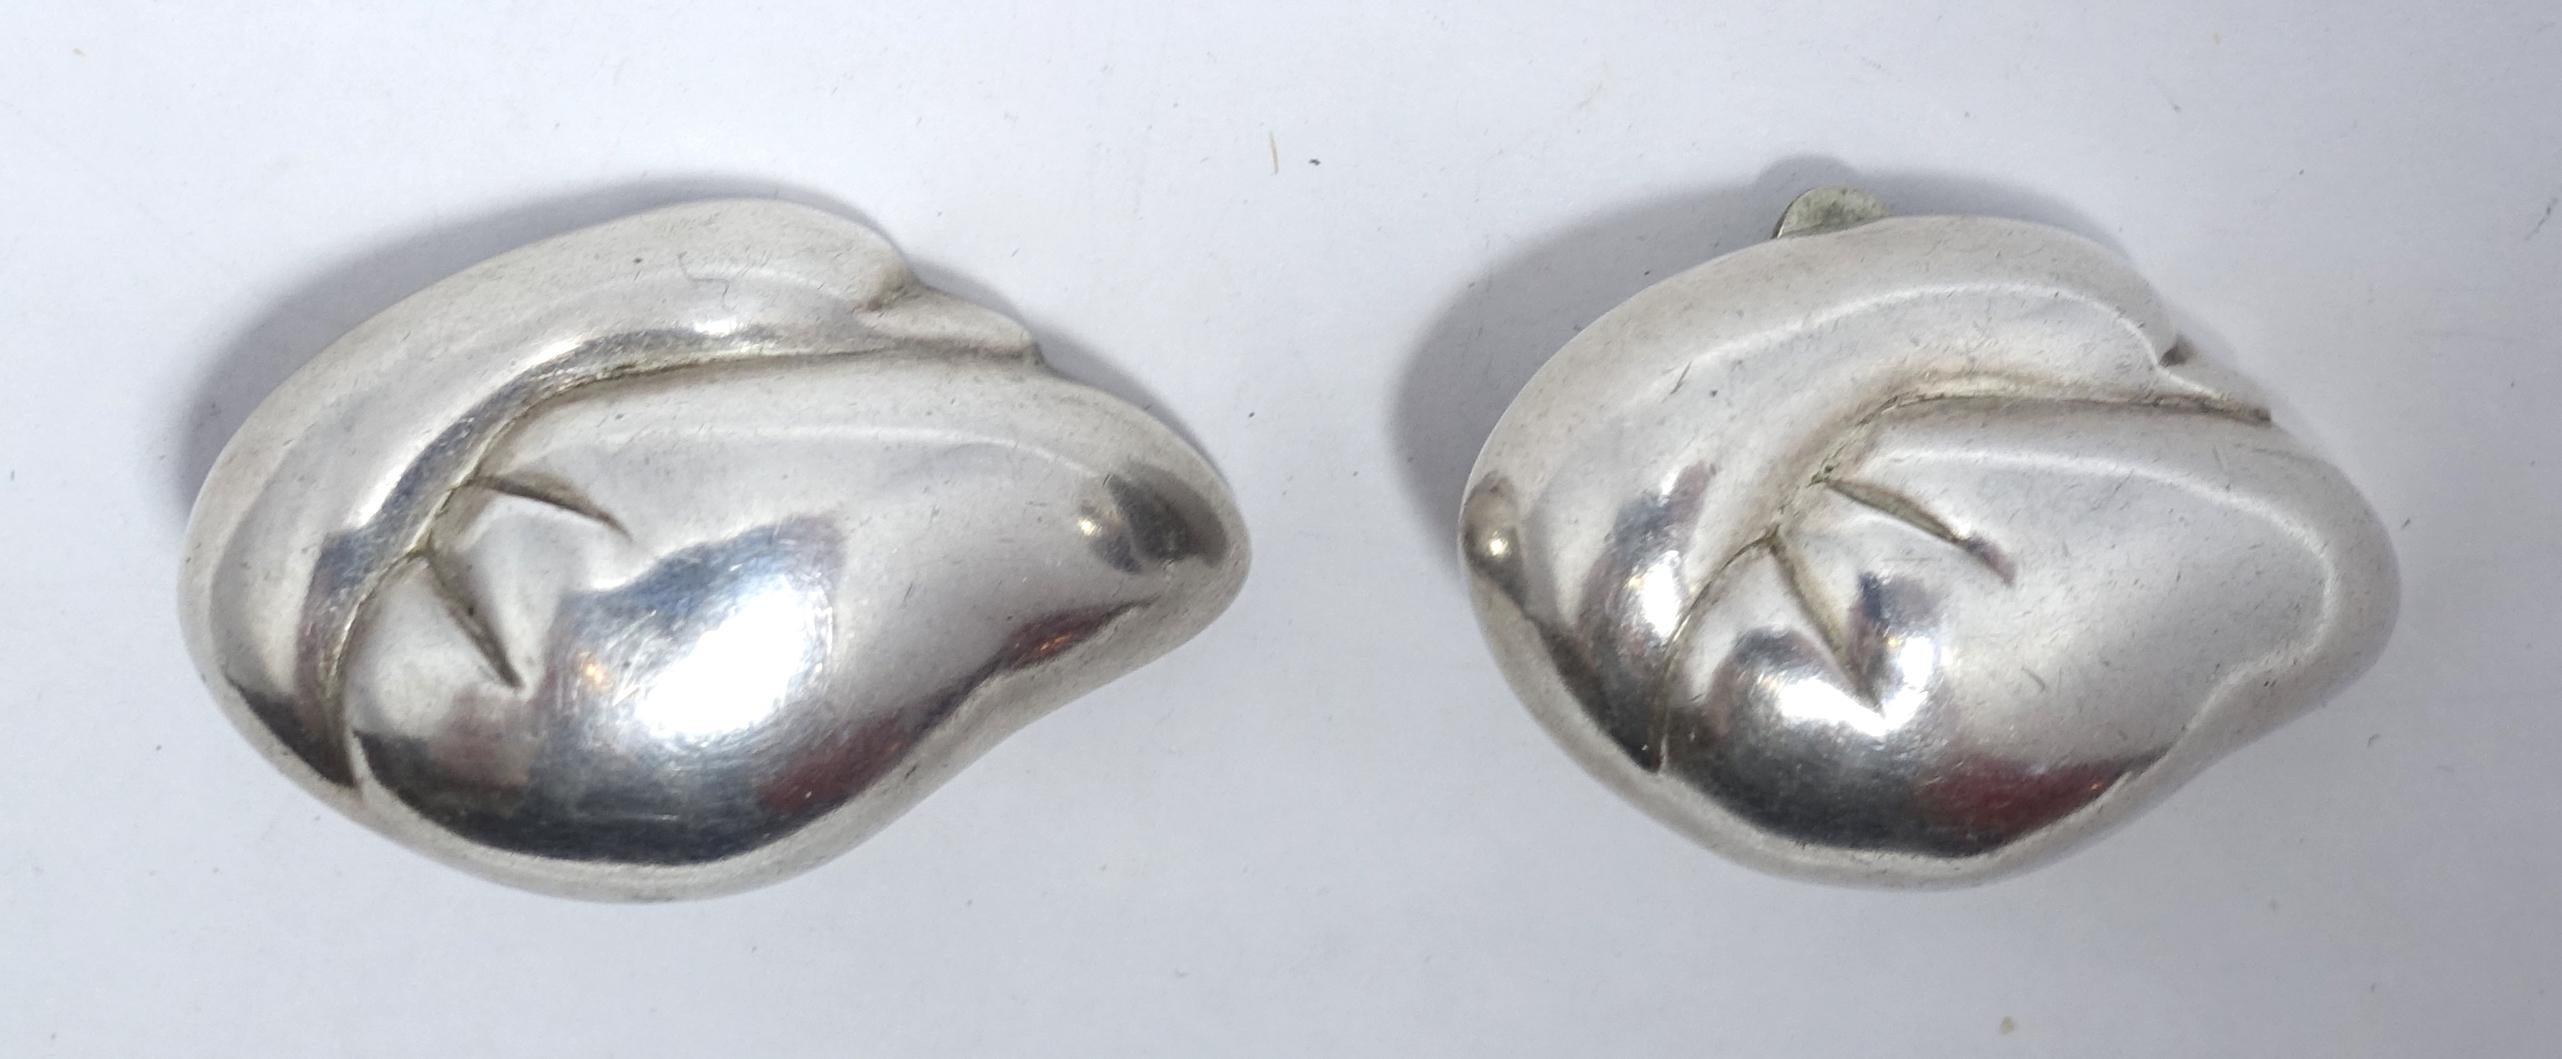 These vintage sterling silver earrings are by Von Musulin in a leaf design.  These clip earrings measure 1-3/8” x 7/8” and are signed “Von Musulin”. They are in excellent condition.